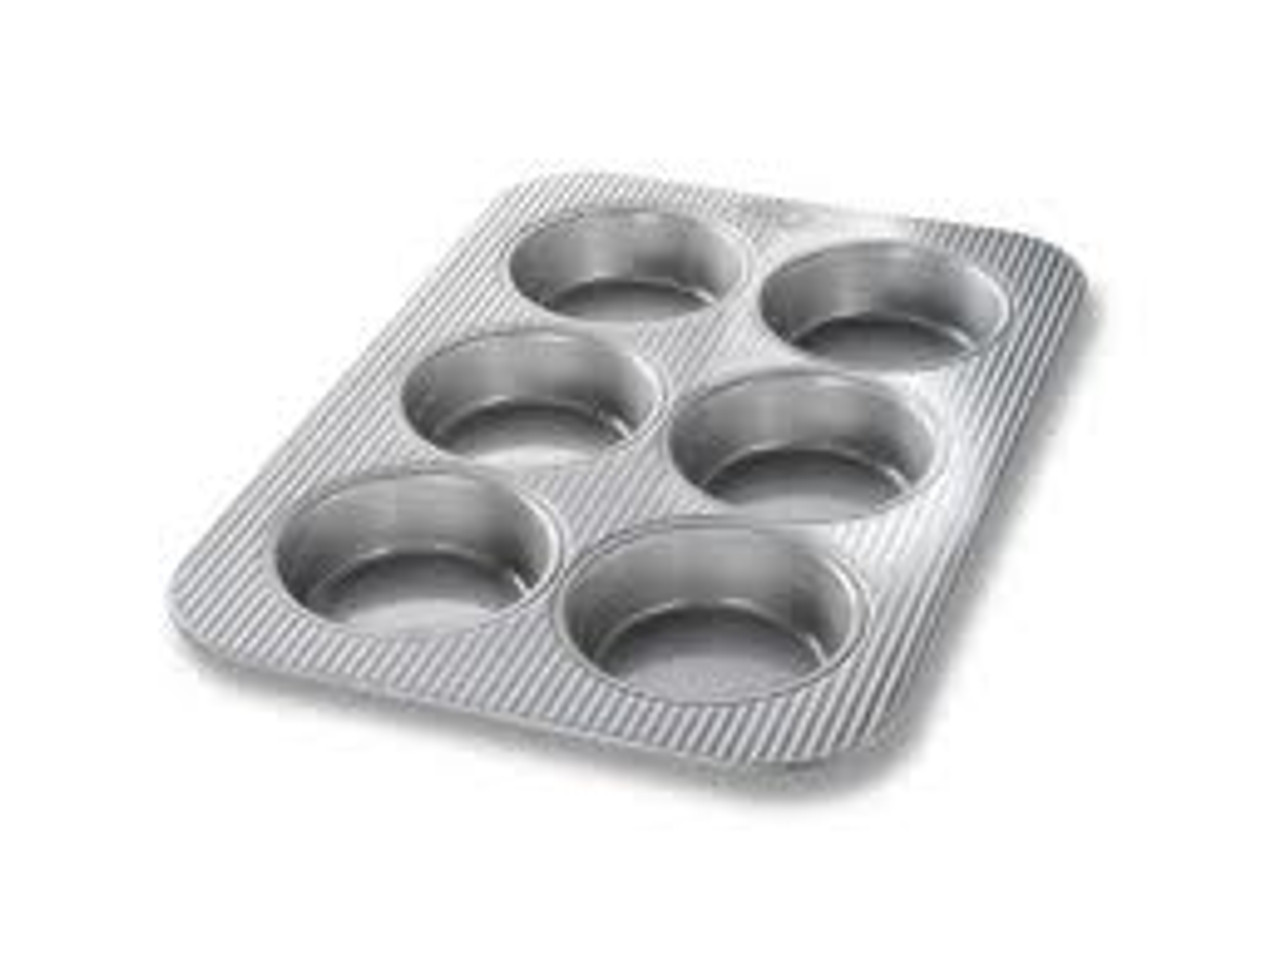 6-Cup Texas Muffin Pan